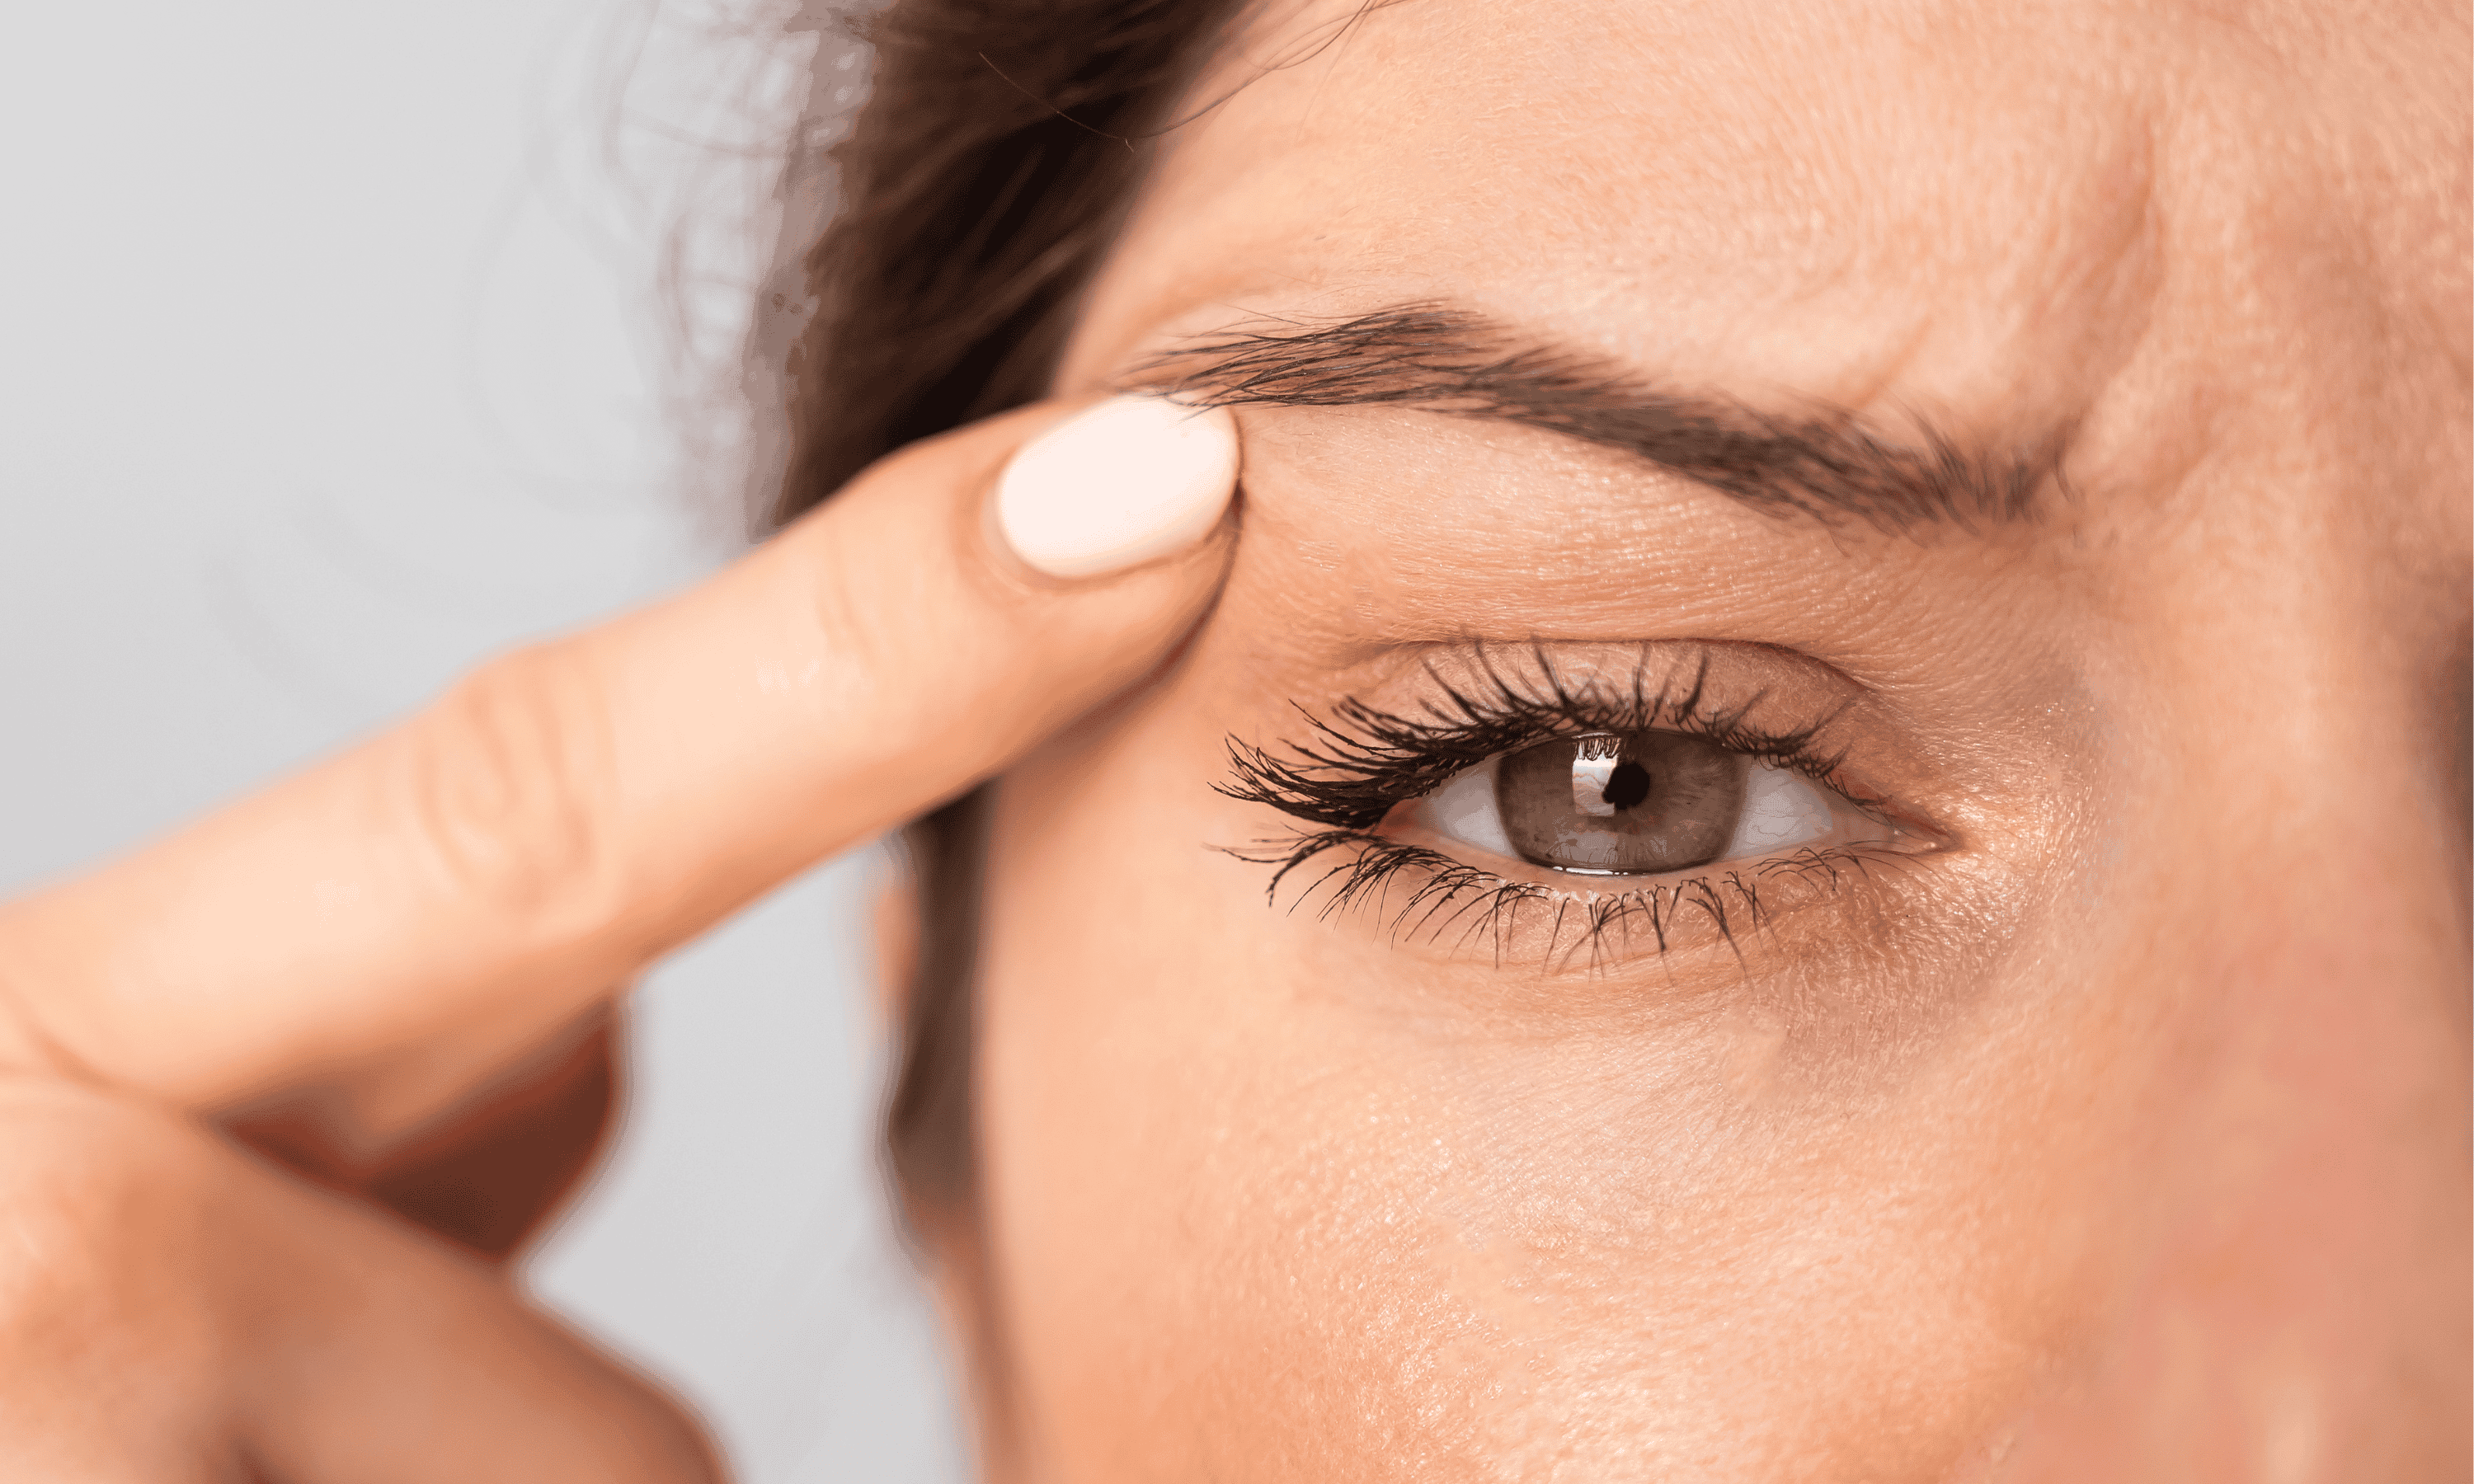 What is an eyelid correction?